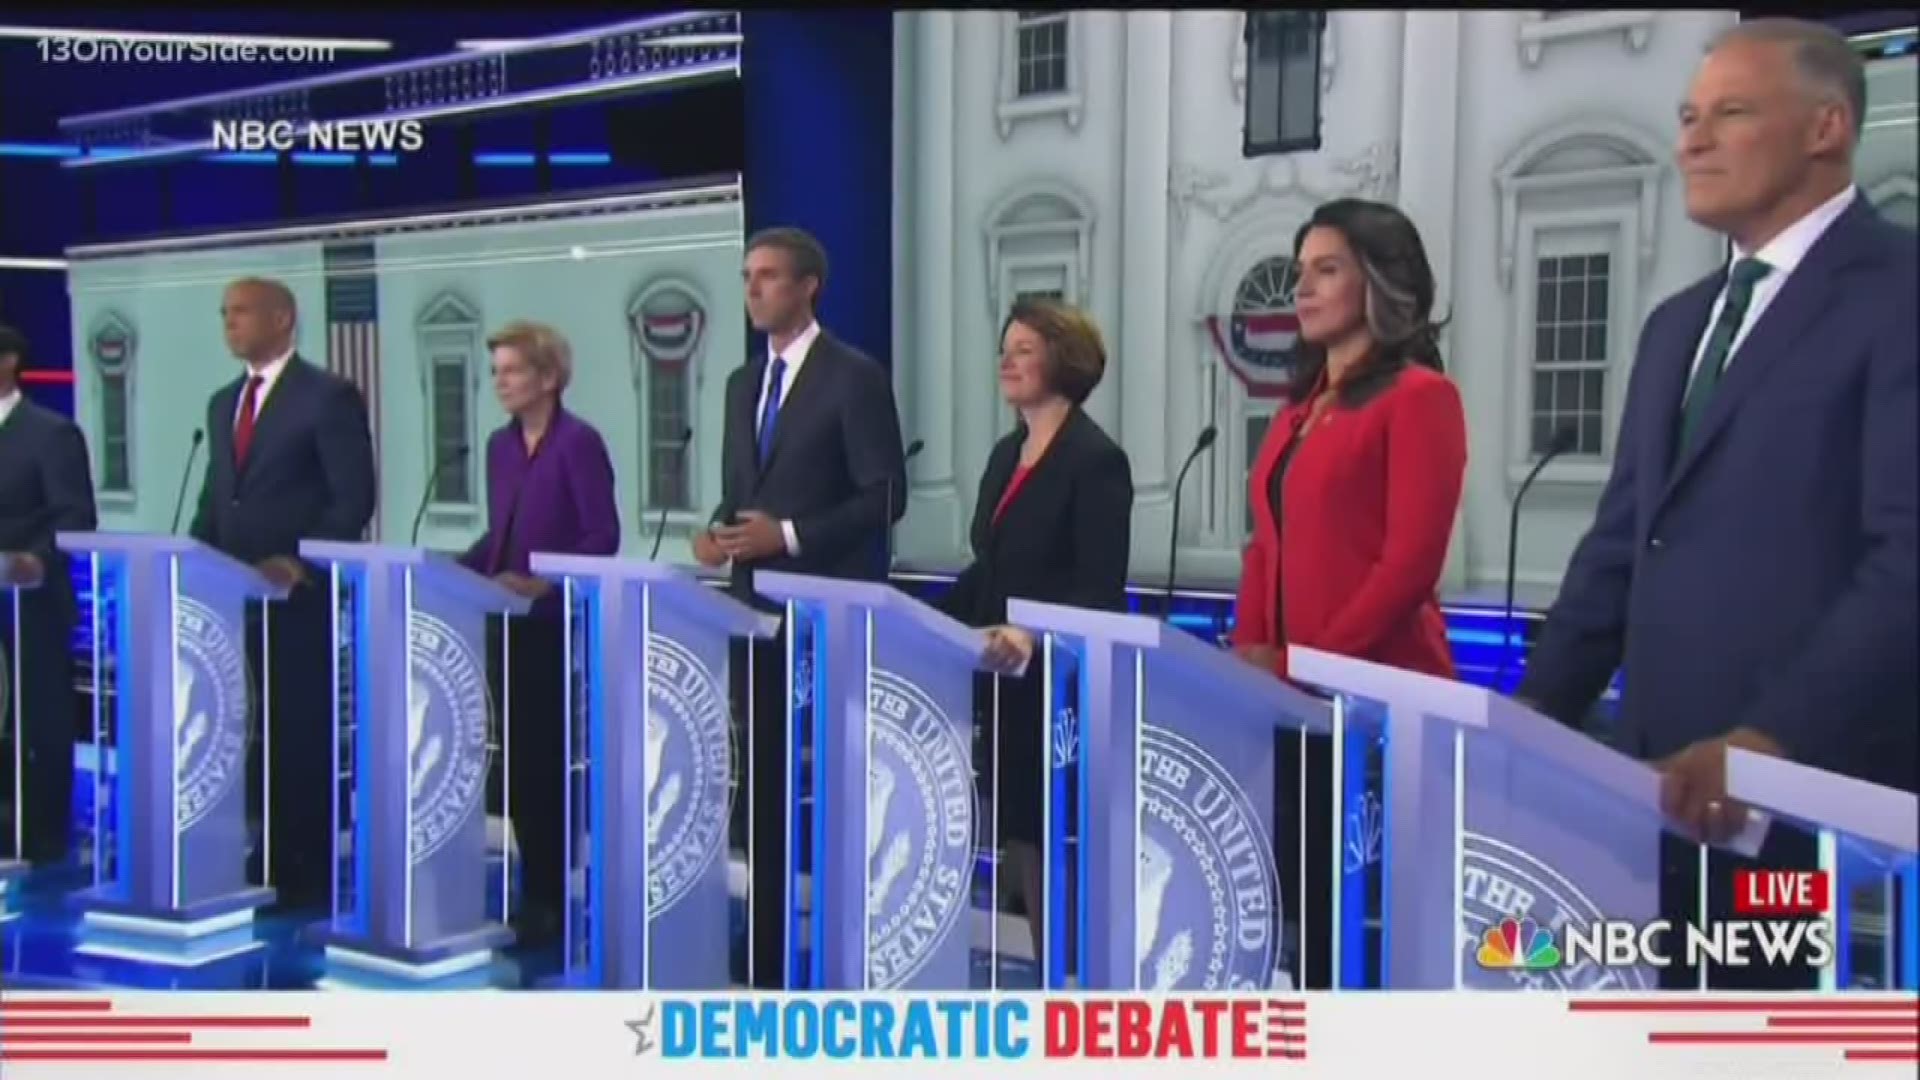 Our VERIFY team fact-checked what the candidates said during the opening debate of the 2020 presidential campaign.